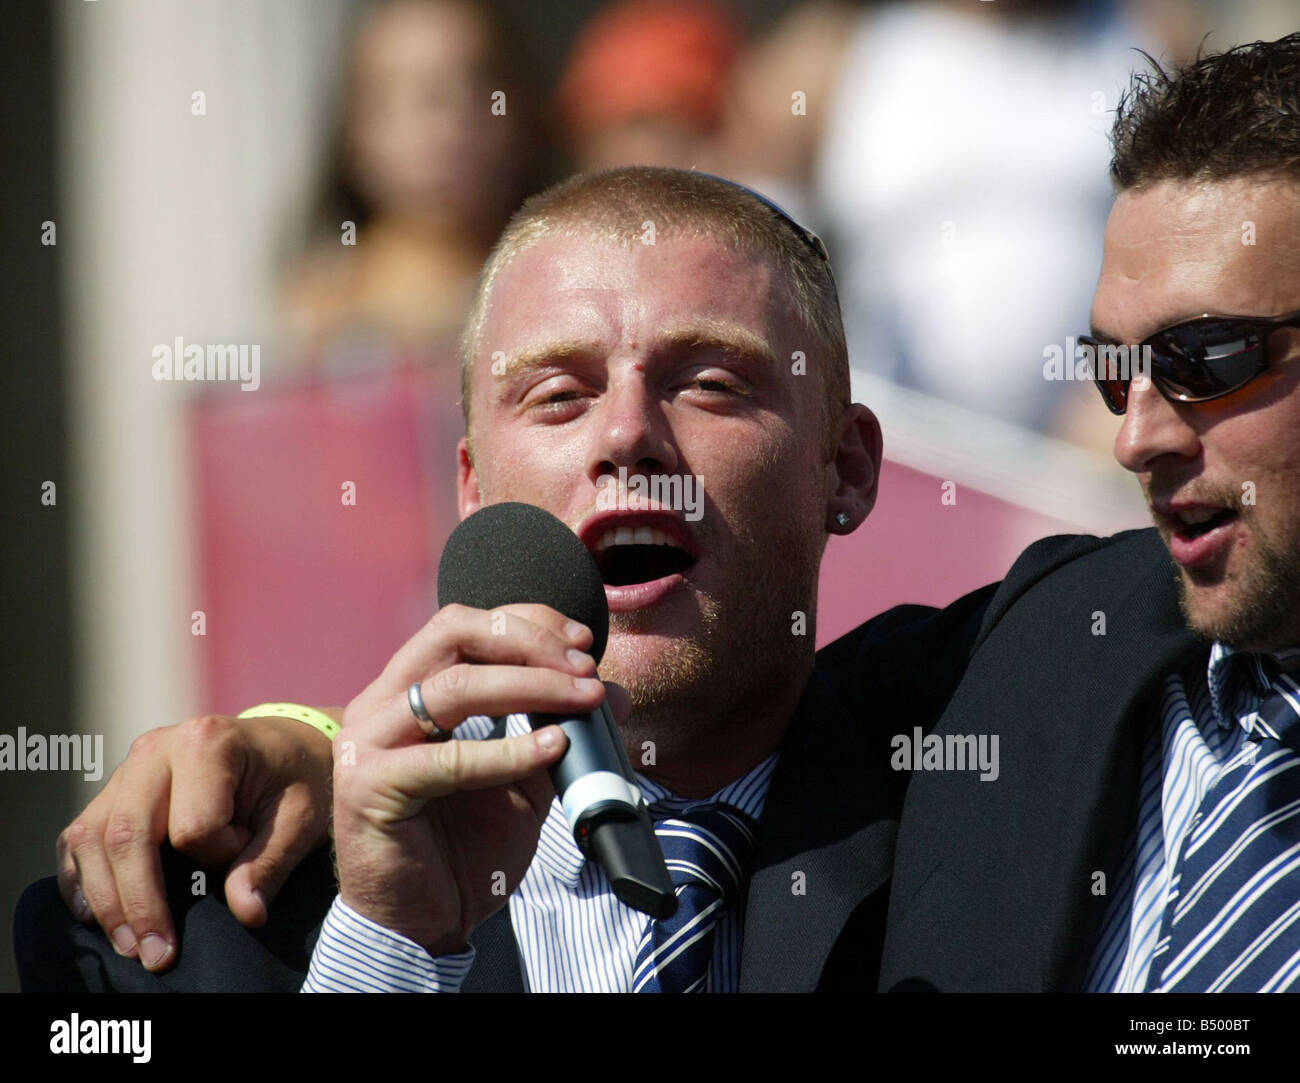 Ashes Celebrations September 2005 Andrew Flintoff singing on stage in Trafalgar square today after winning the Ashes back yesterday England were triumphant against Australia for the first time in 18 years when they drew in the fifth test to clinch the 2005 Ashes Drunk Stock Photo